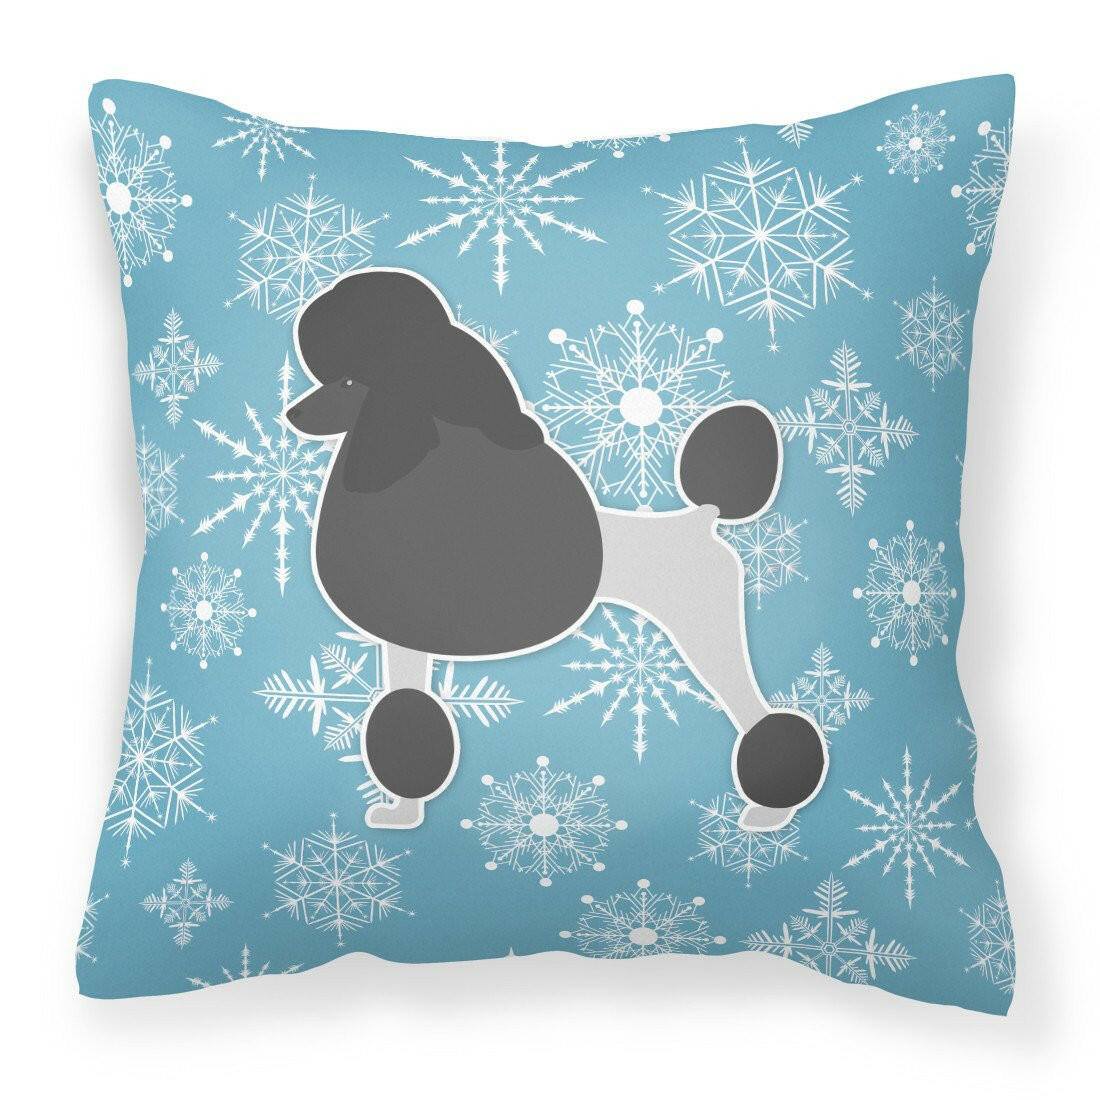 Winter Snowflake Poodle Fabric Decorative Pillow BB3539PW1818 by Caroline's Treasures